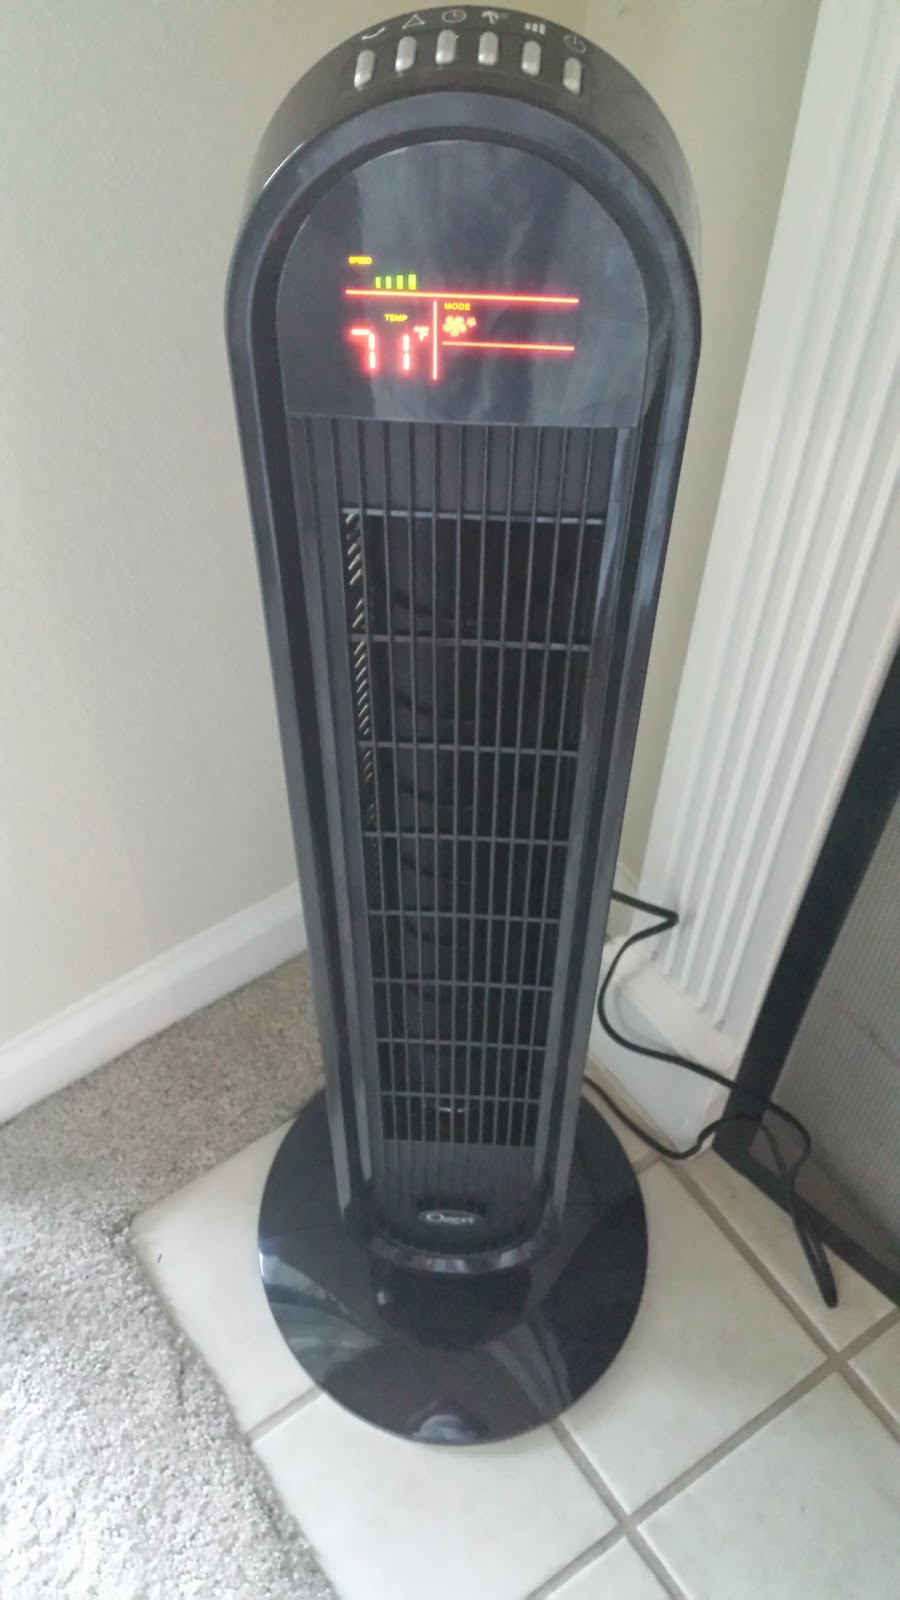 Cool Down Your Room With A Tower Fan Ozeri 360 Tower Fan Review throughout sizing 900 X 1600